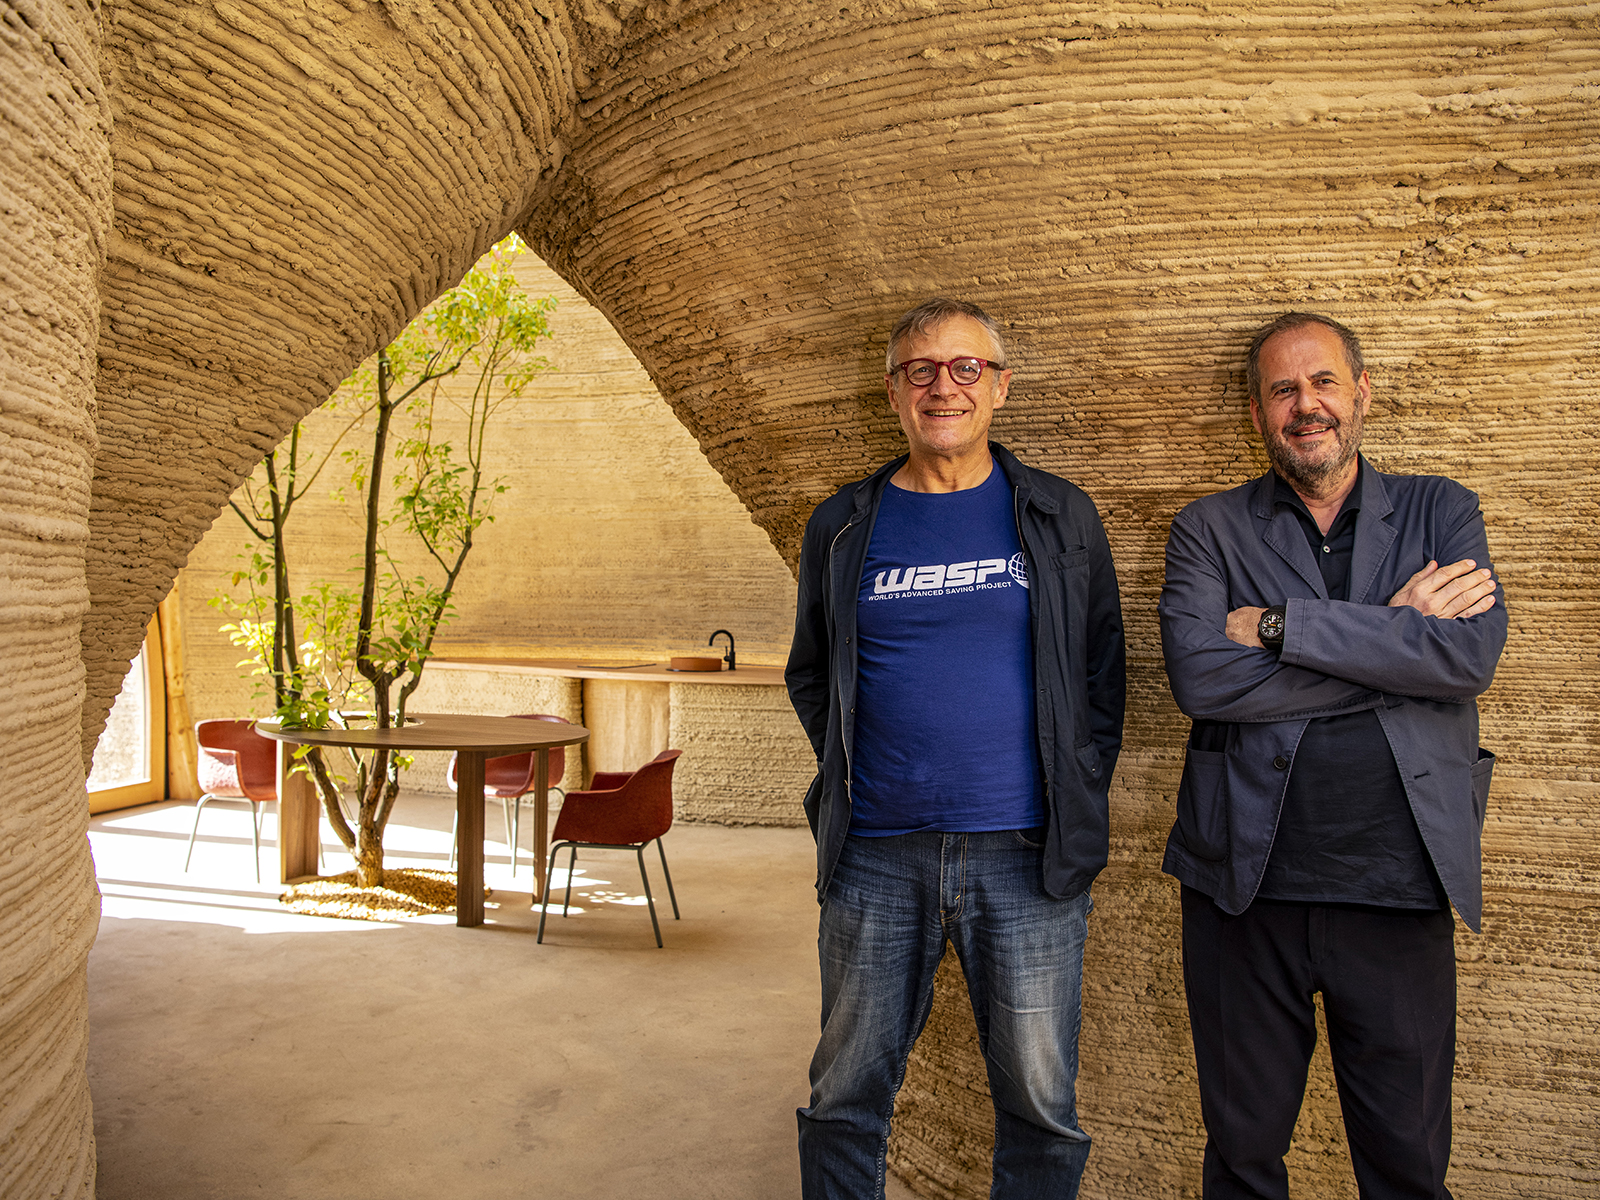 Massimo Moretti and Mario Cucinella inside one of their sustainable houses created using 3D architecture printing